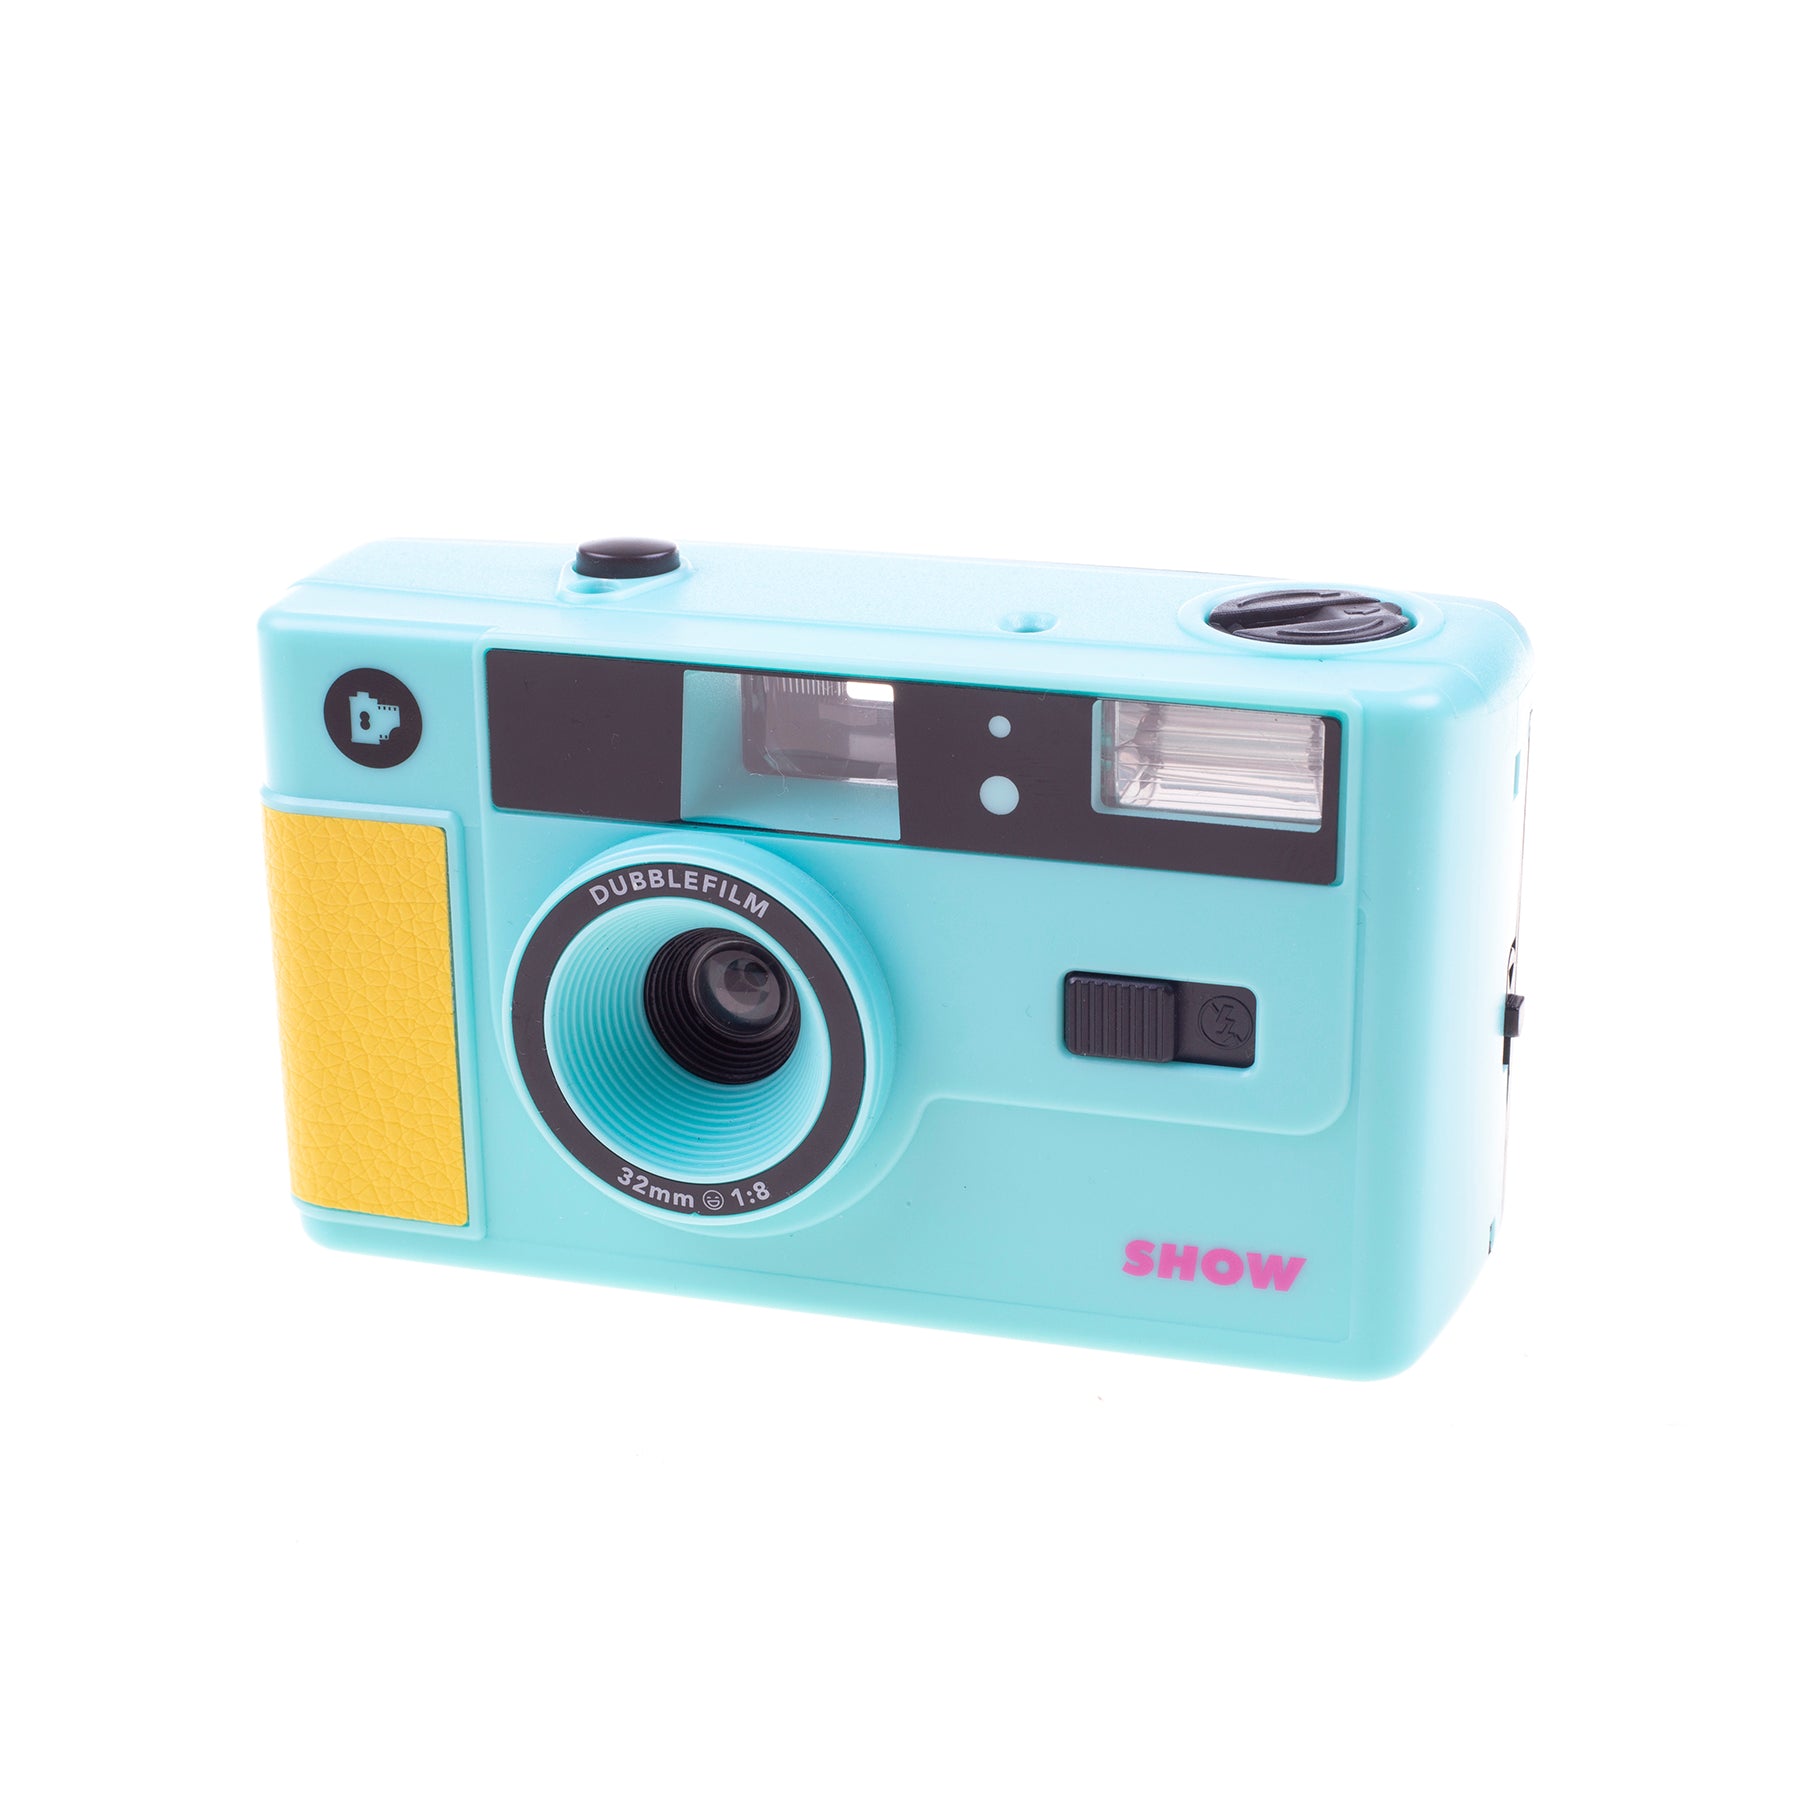 SHOW camera by Dubblefilm - Turquoise